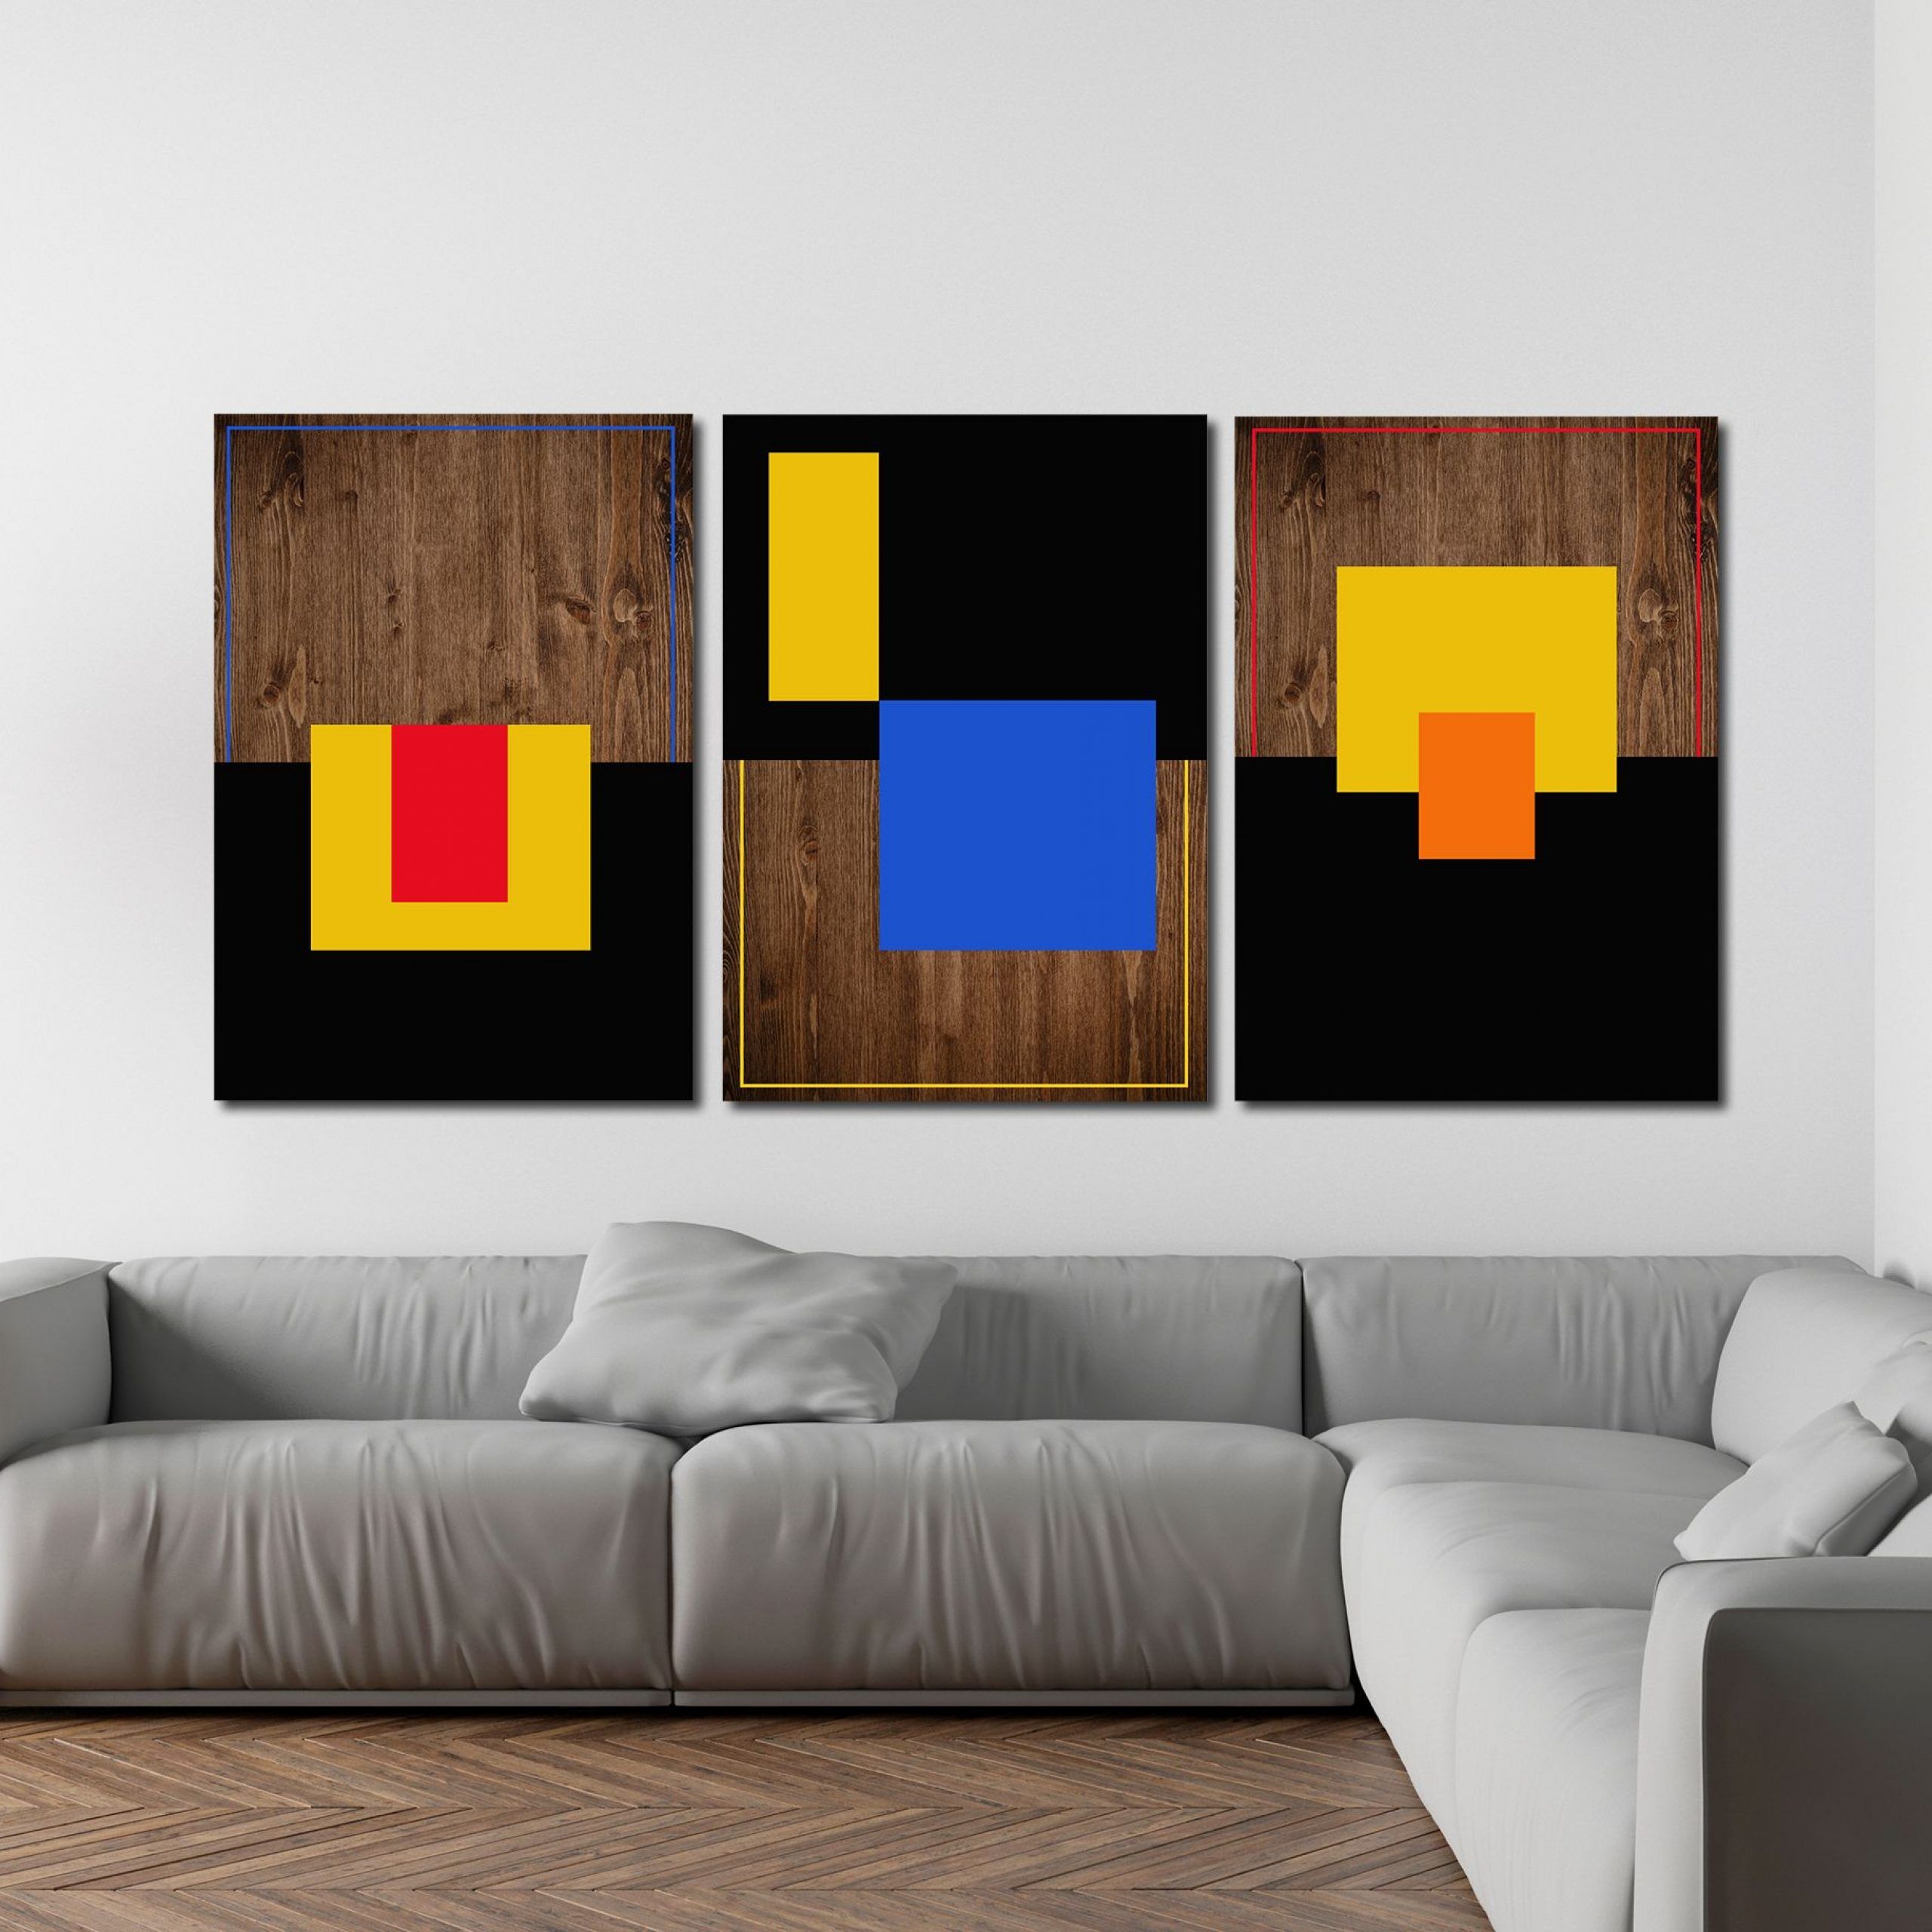 Buy Custom Made 3 Panel Art 72x40 – Wood Wall Art, Abstract Painting, Modern  Art, Home Decor, Made To Order From Mod Wood Art | Custommade With Regard To Abstract Modern Wood Wall Art (View 1 of 15)